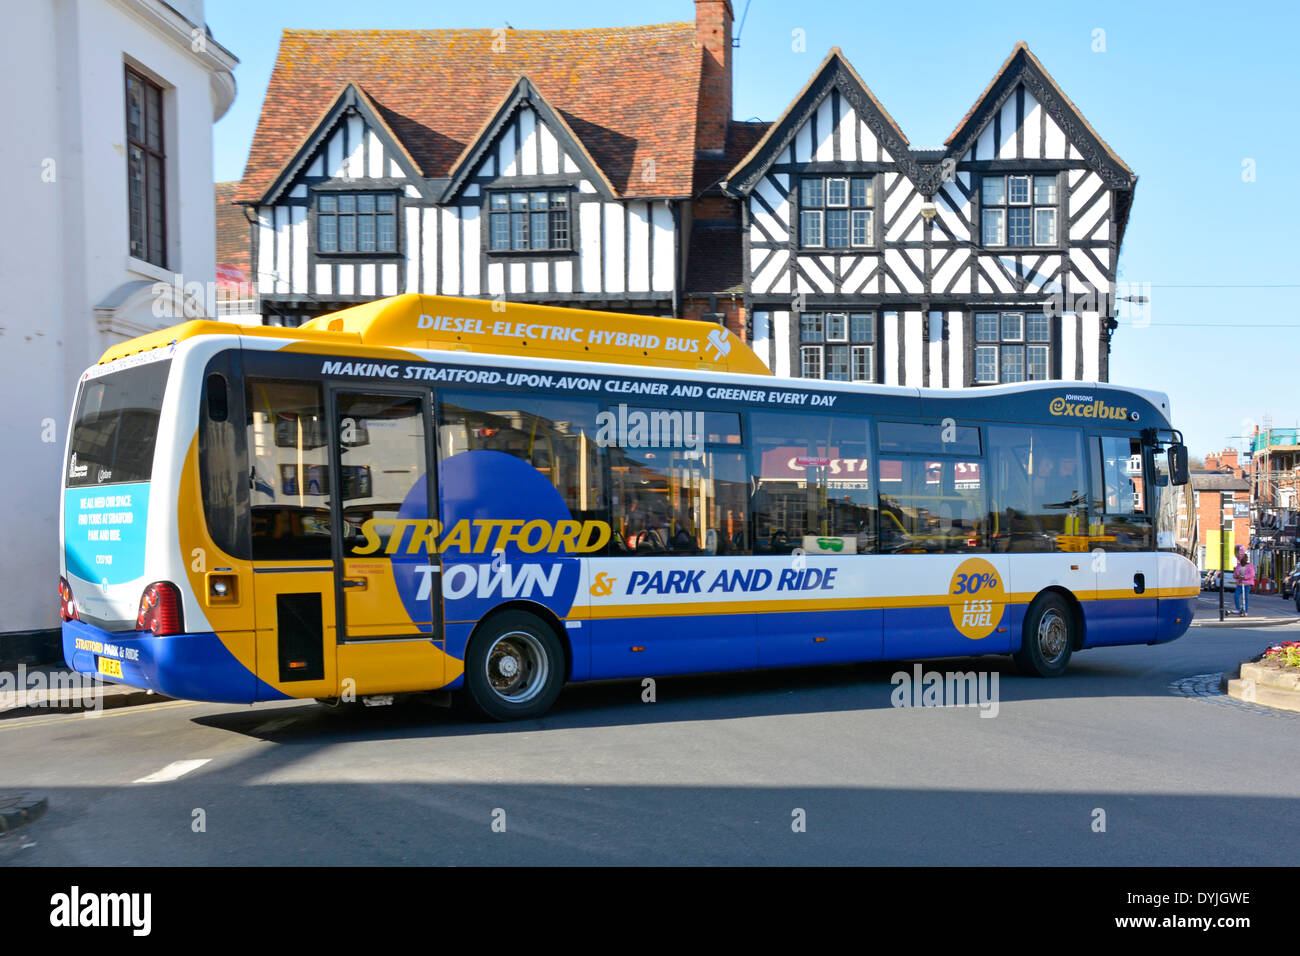 Stratford upon Avon park and ride Diesel Electric Hybrid bus service Stock Photo